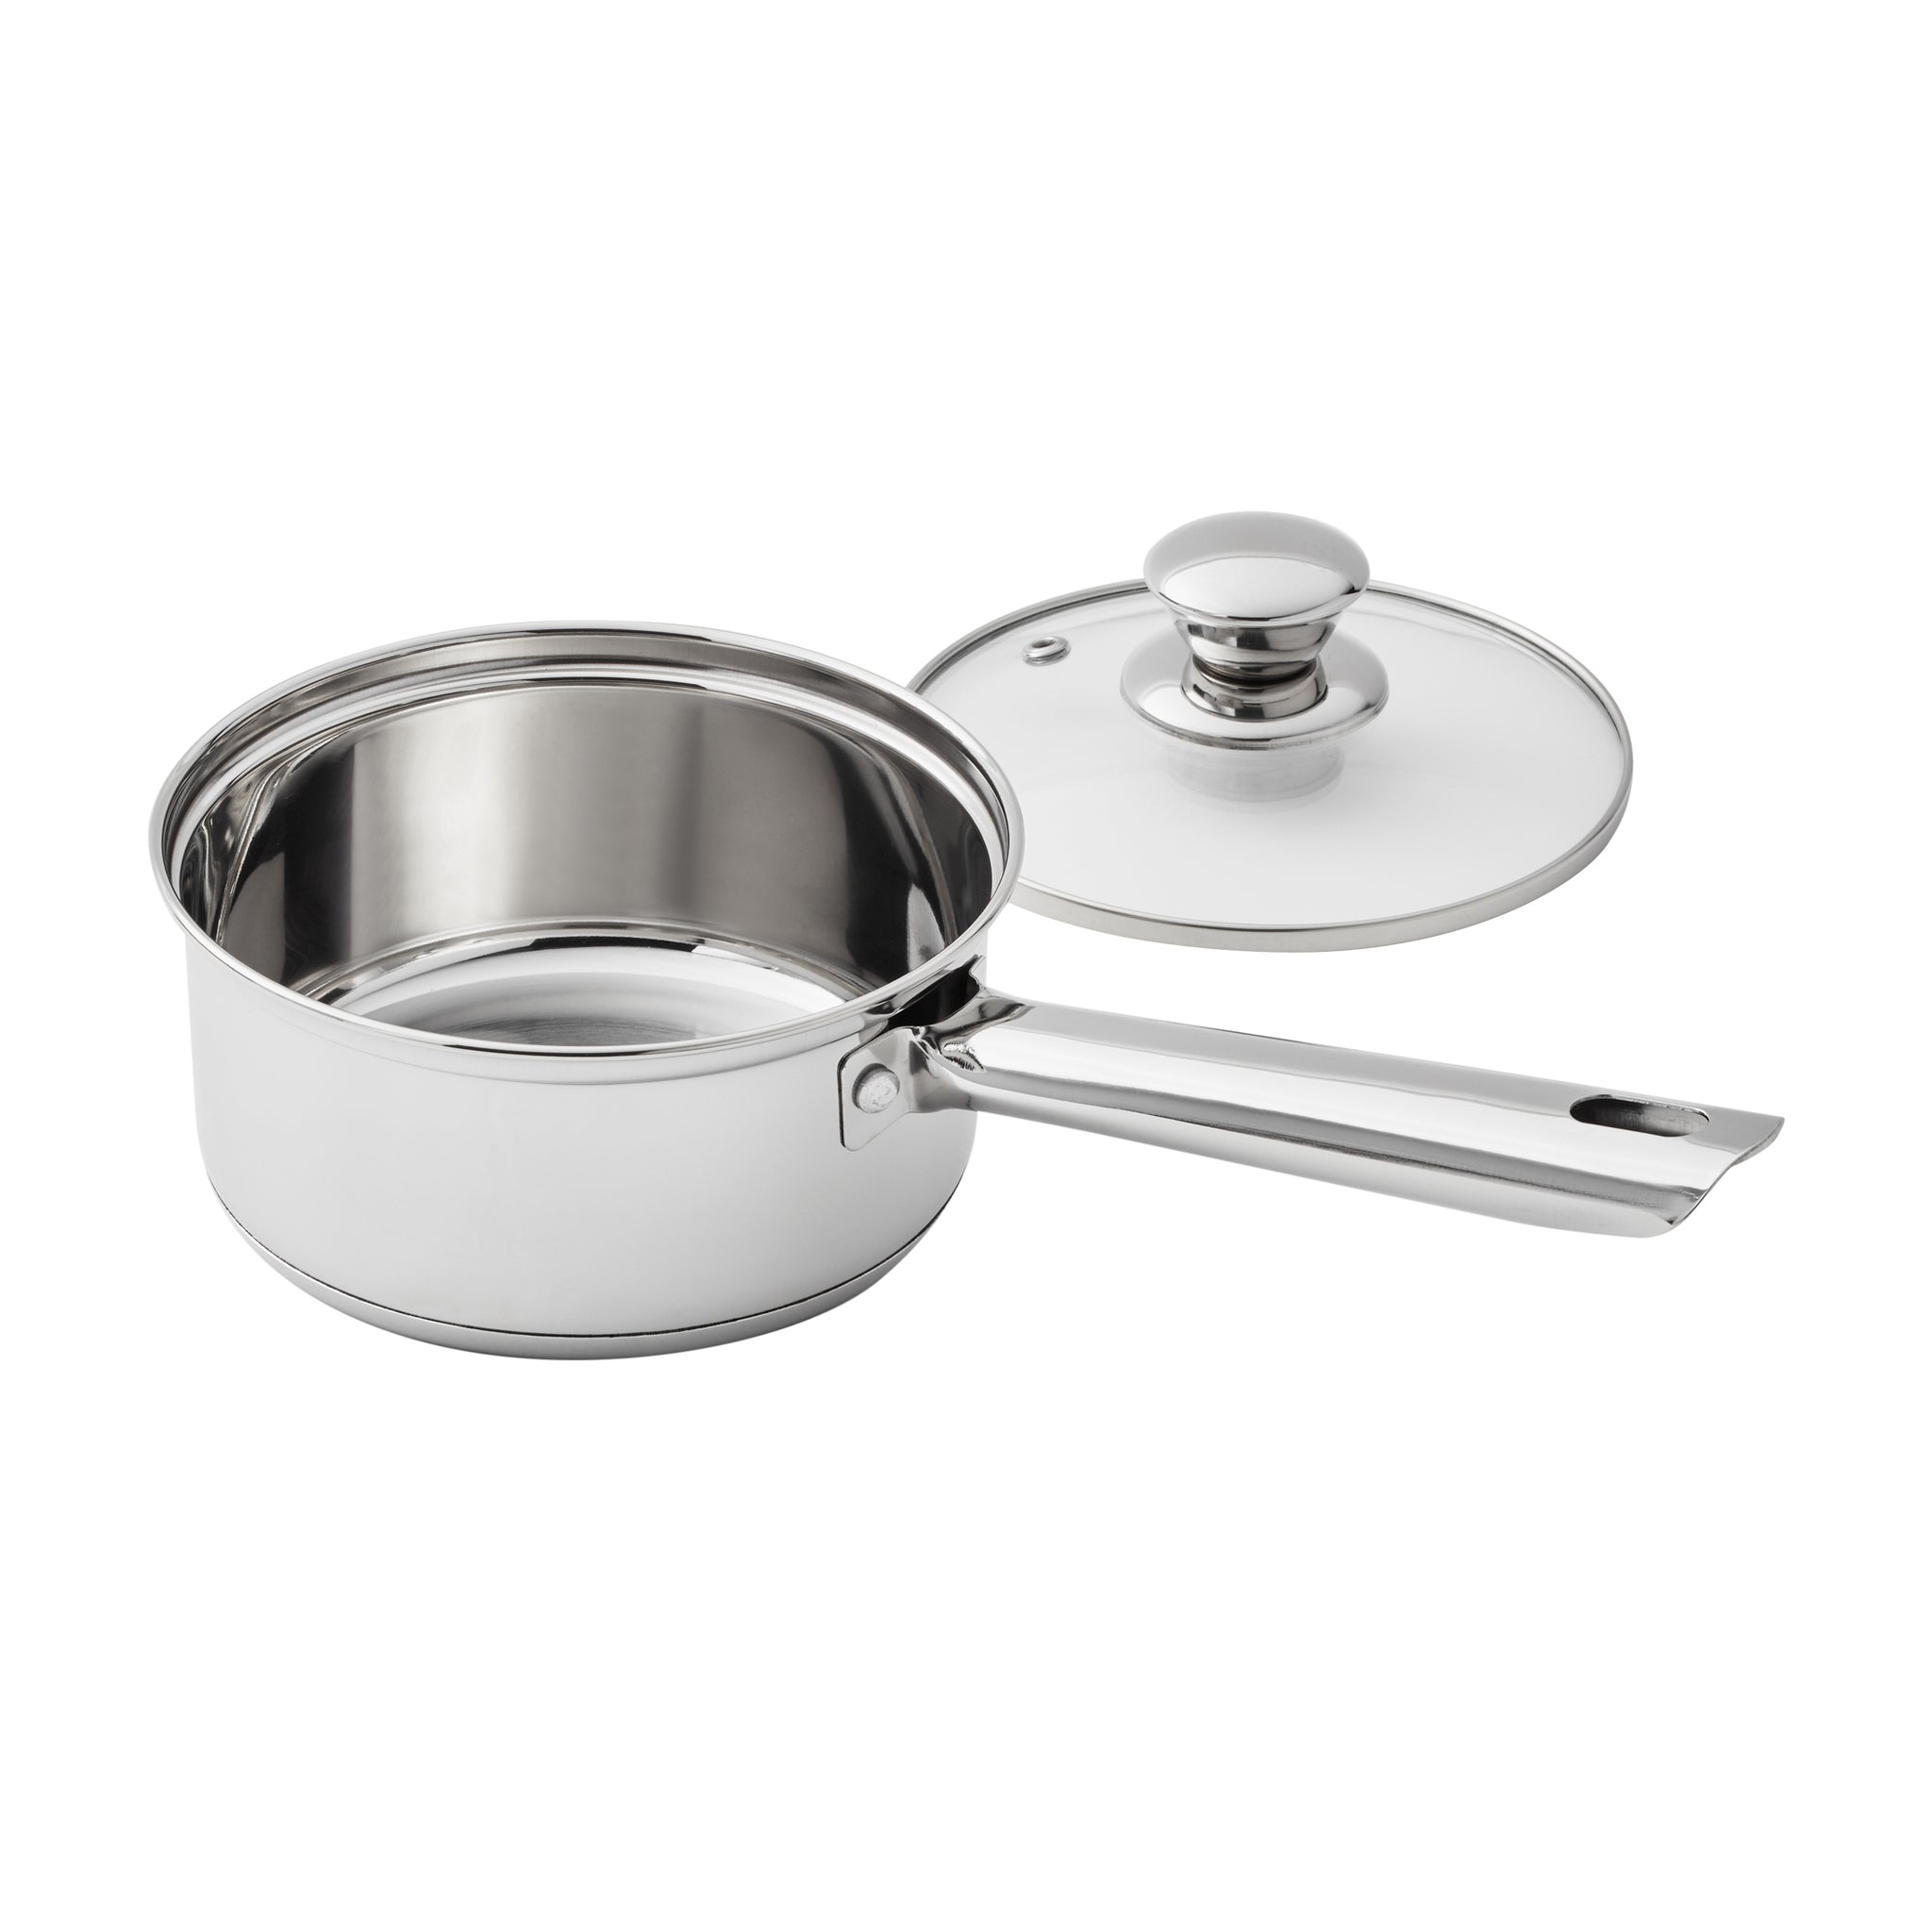 Mainstays Stainless Steel 10-Piece Cookware Set